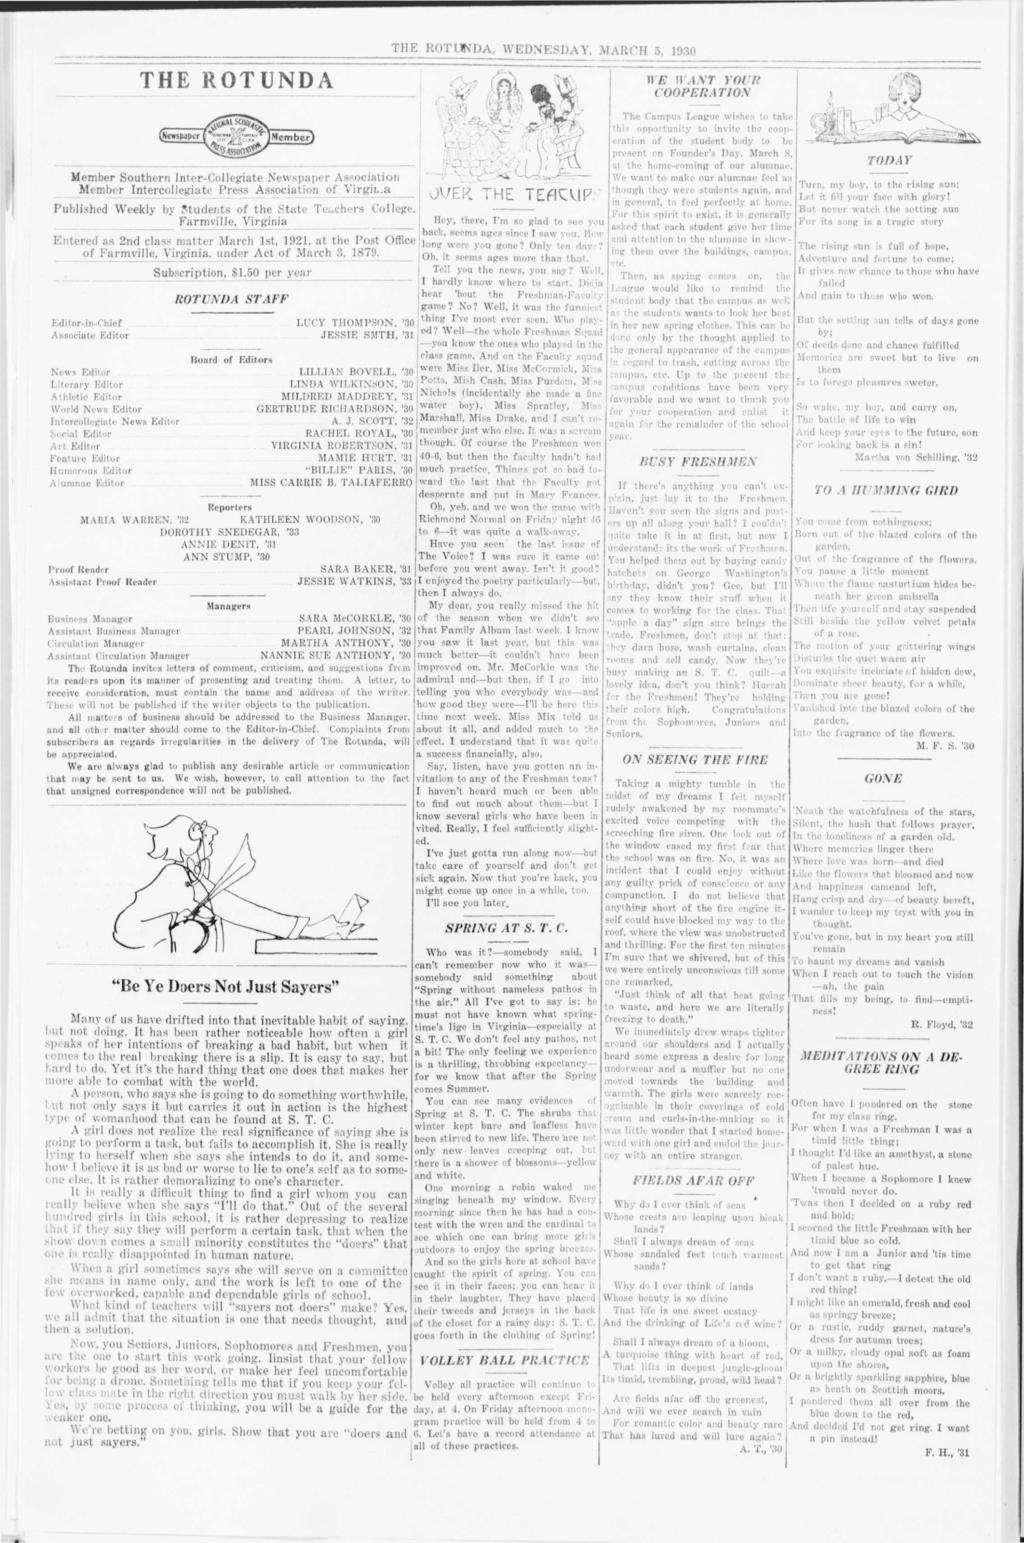 THE ROTUNDA (Newspaper #^5 s& 'AL Member] Member Southern nter-collegate Newspaper aton Member ntercollegate Press Assocaton of Vrgna Publshed Weekly by Students of the State Teachers College